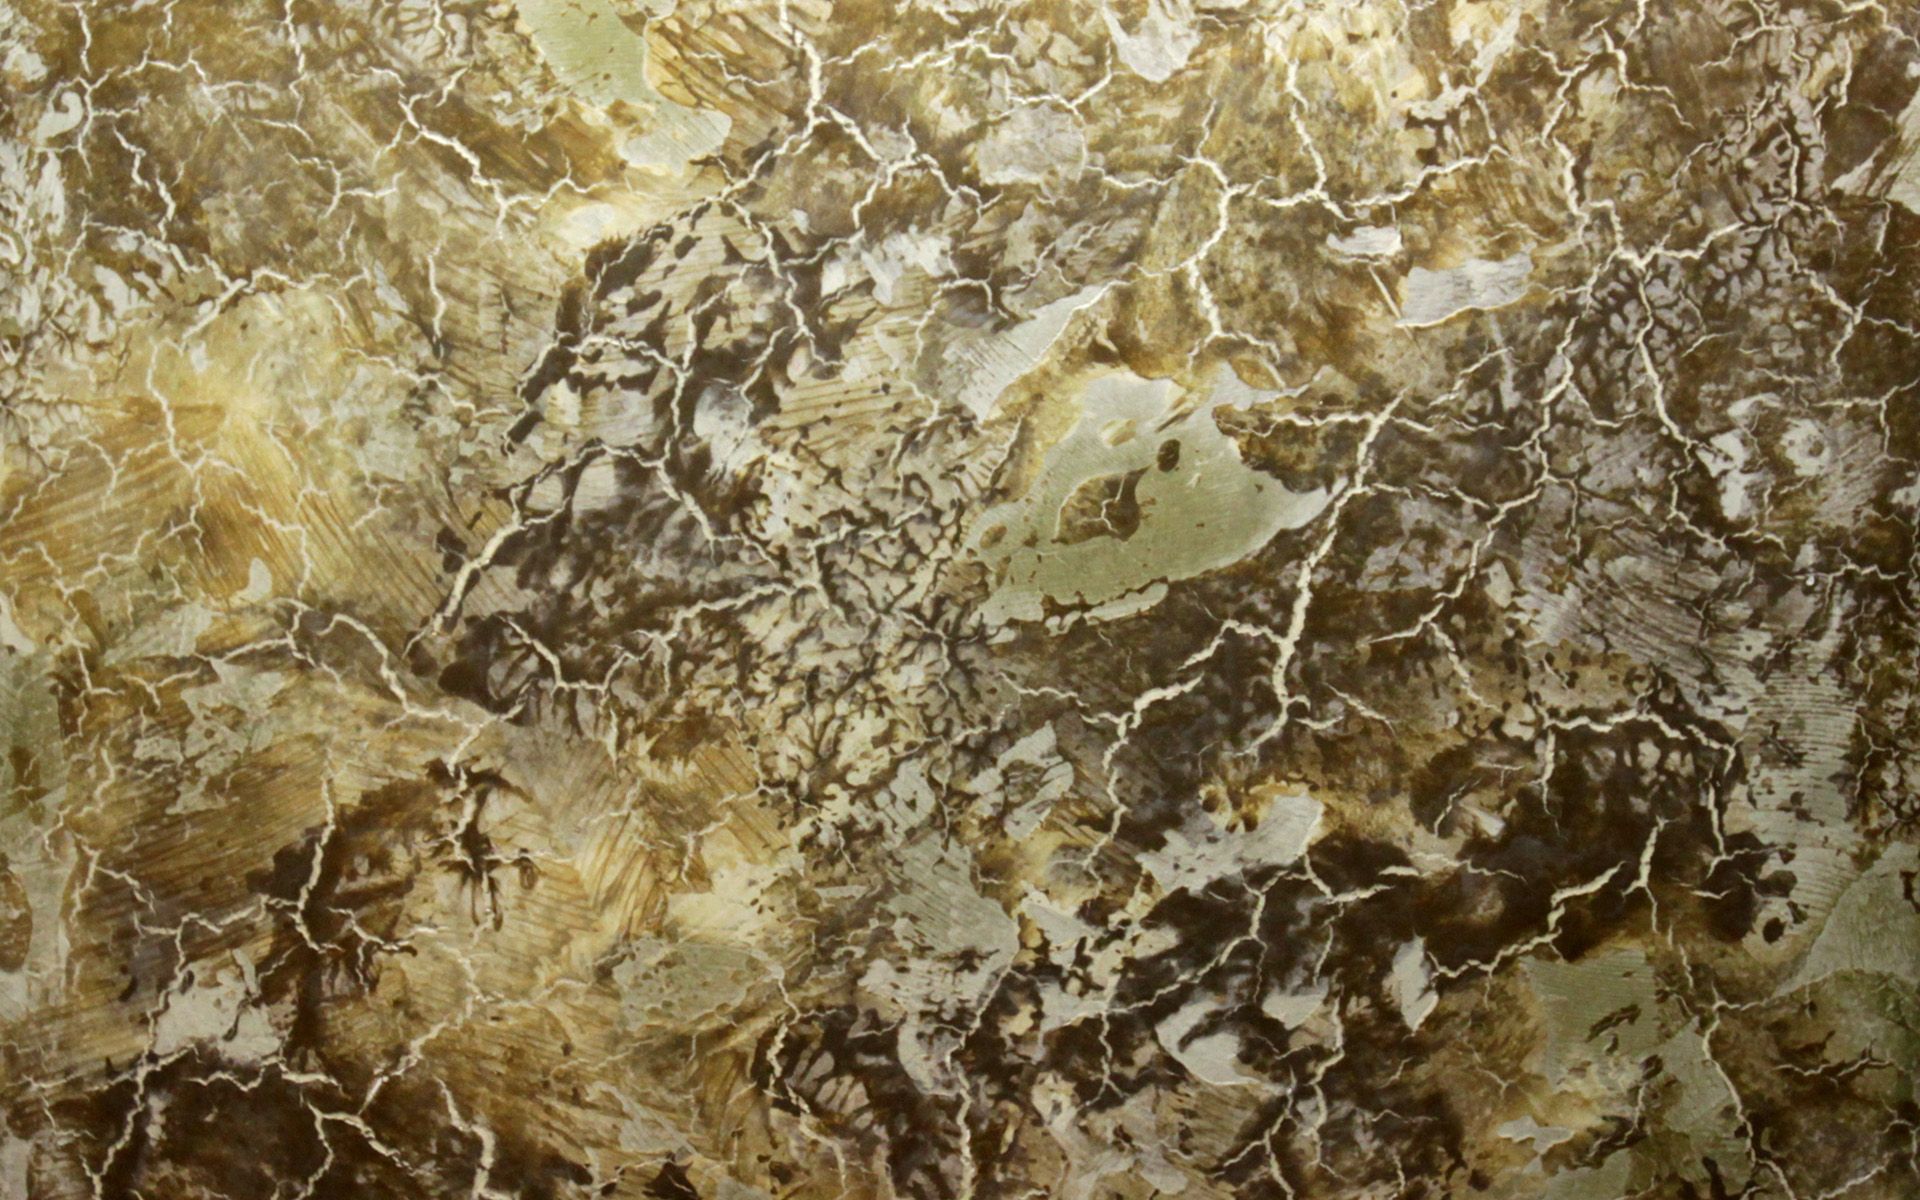 Download wallpaper brown marble texture, macro, stone textures, marble background, marble textures for desktop with resolution 1920x1200. High Quality HD picture wallpaper